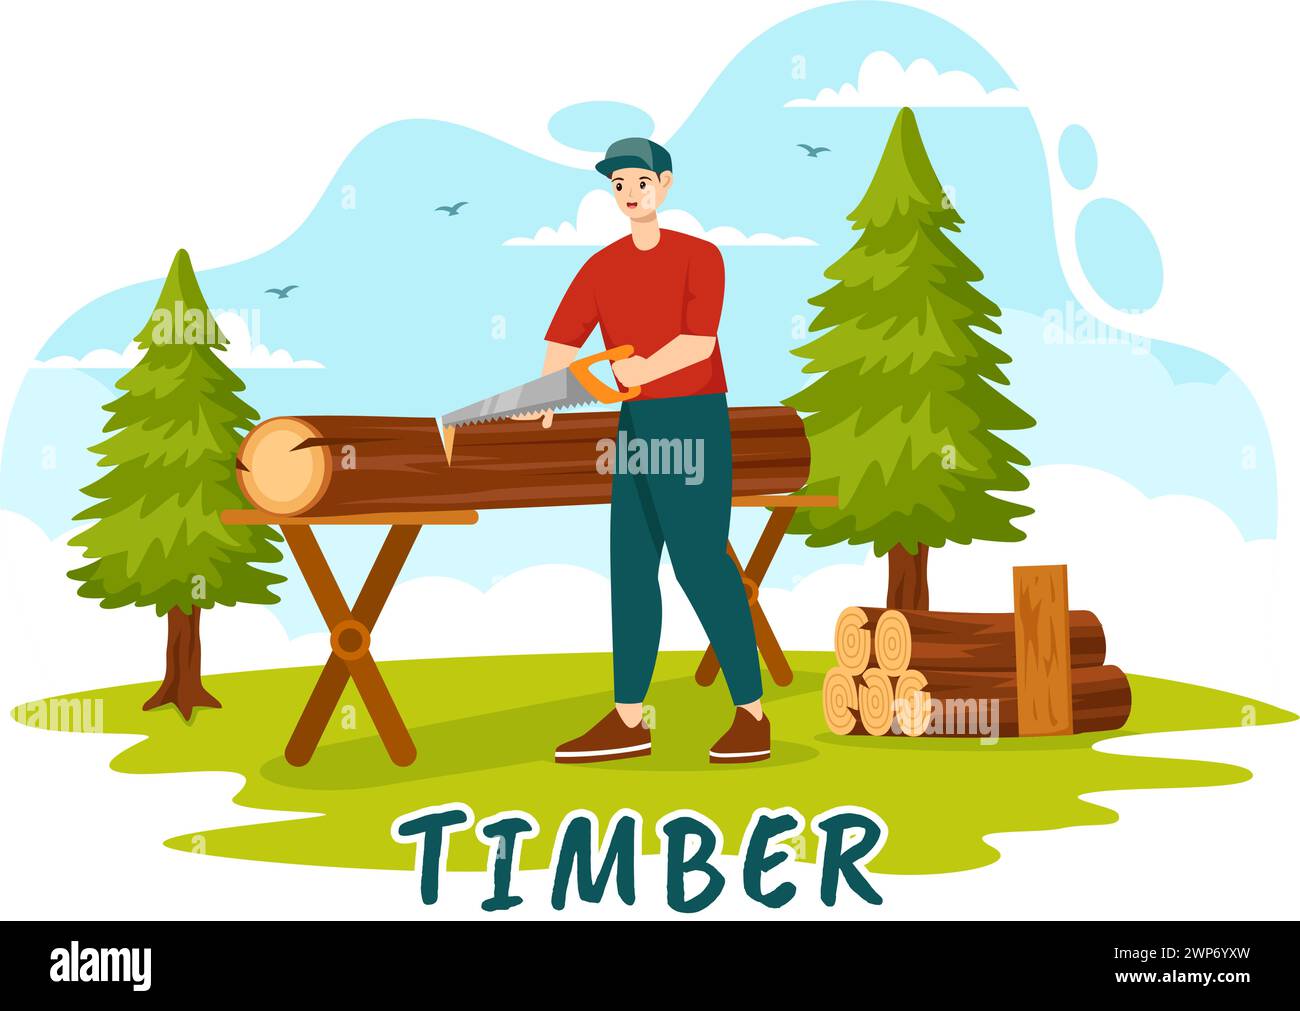 Timber Vector Illustration with Man Chopping Wood and Tree with Lumberjack Work Equipment Machinery or Chainsaw at Forest in Flat Cartoon Background Stock Vector